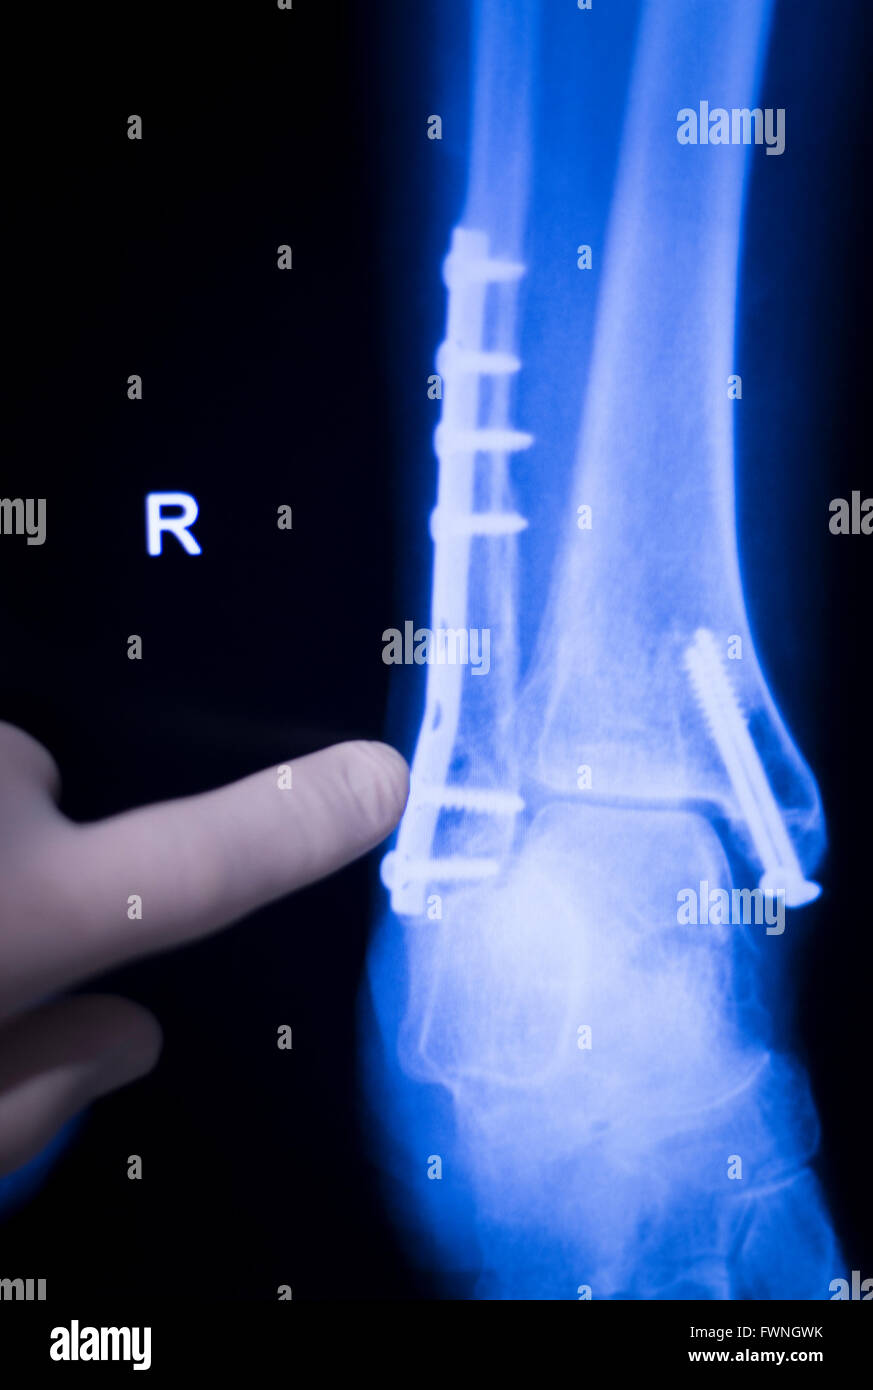 Foot, ankle and leg medical x-ray test scan result for adult showing orthopedic Traumatology titanium metal plate implant image. Stock Photo